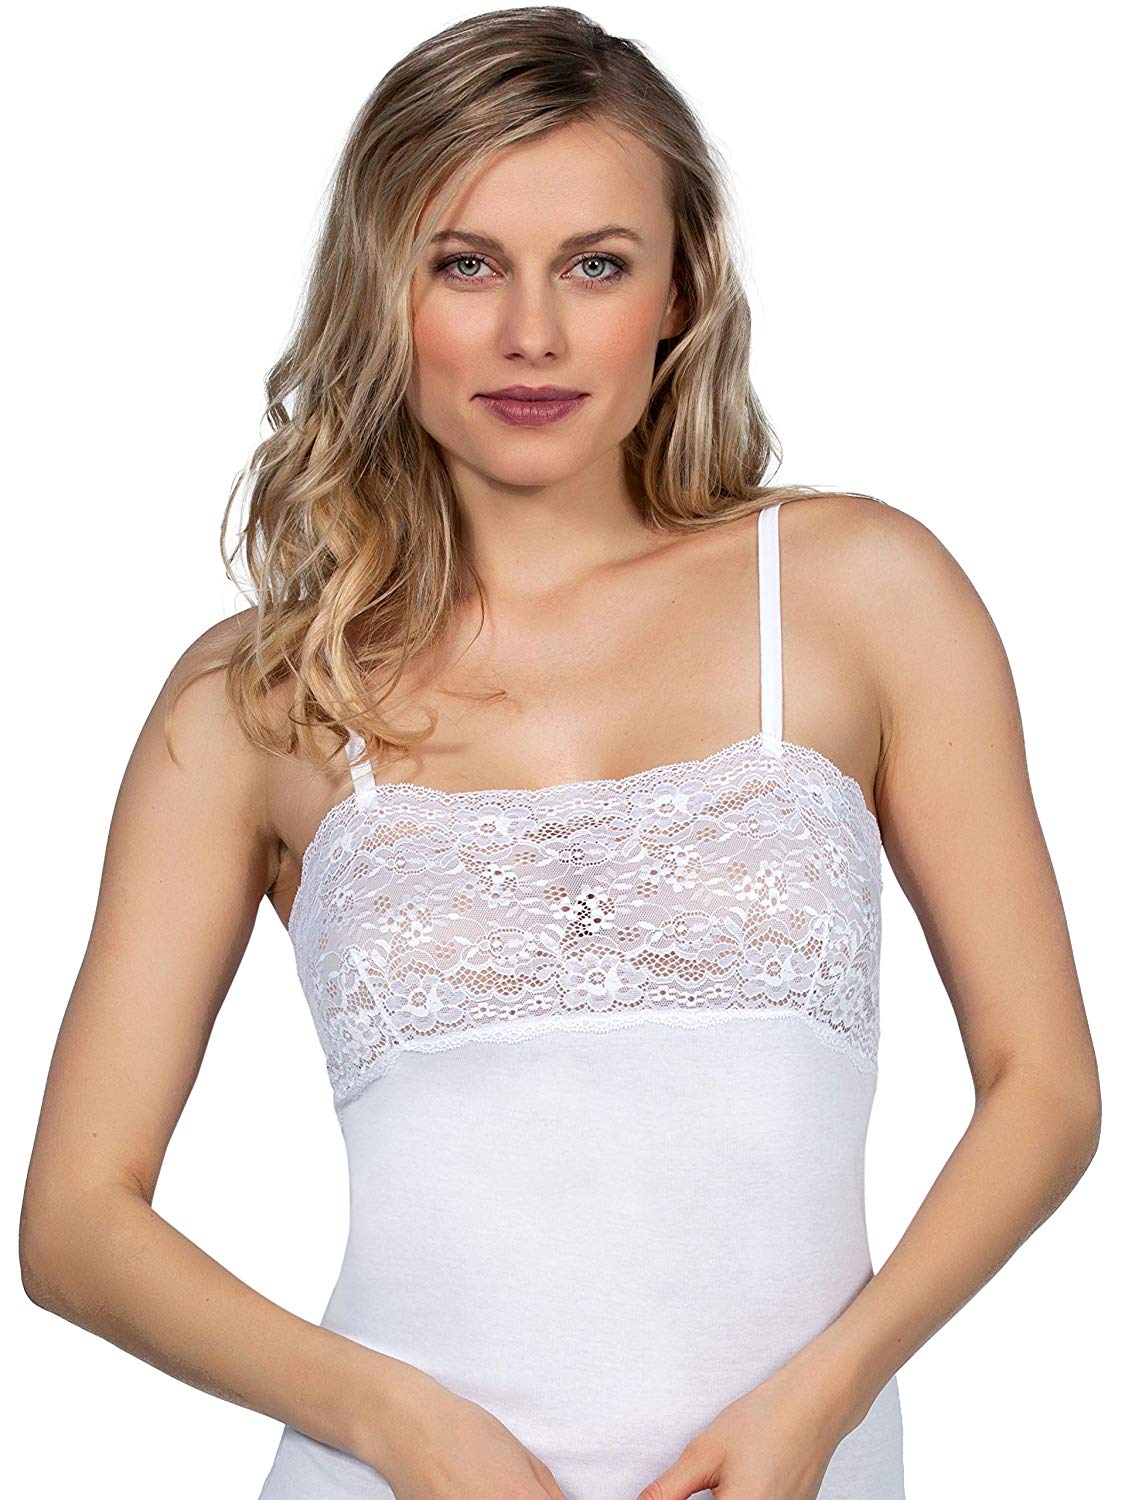 Mare Luxury 100% Mako Cotton Women's Lace-Trimmed Camisole. Proudly Ma